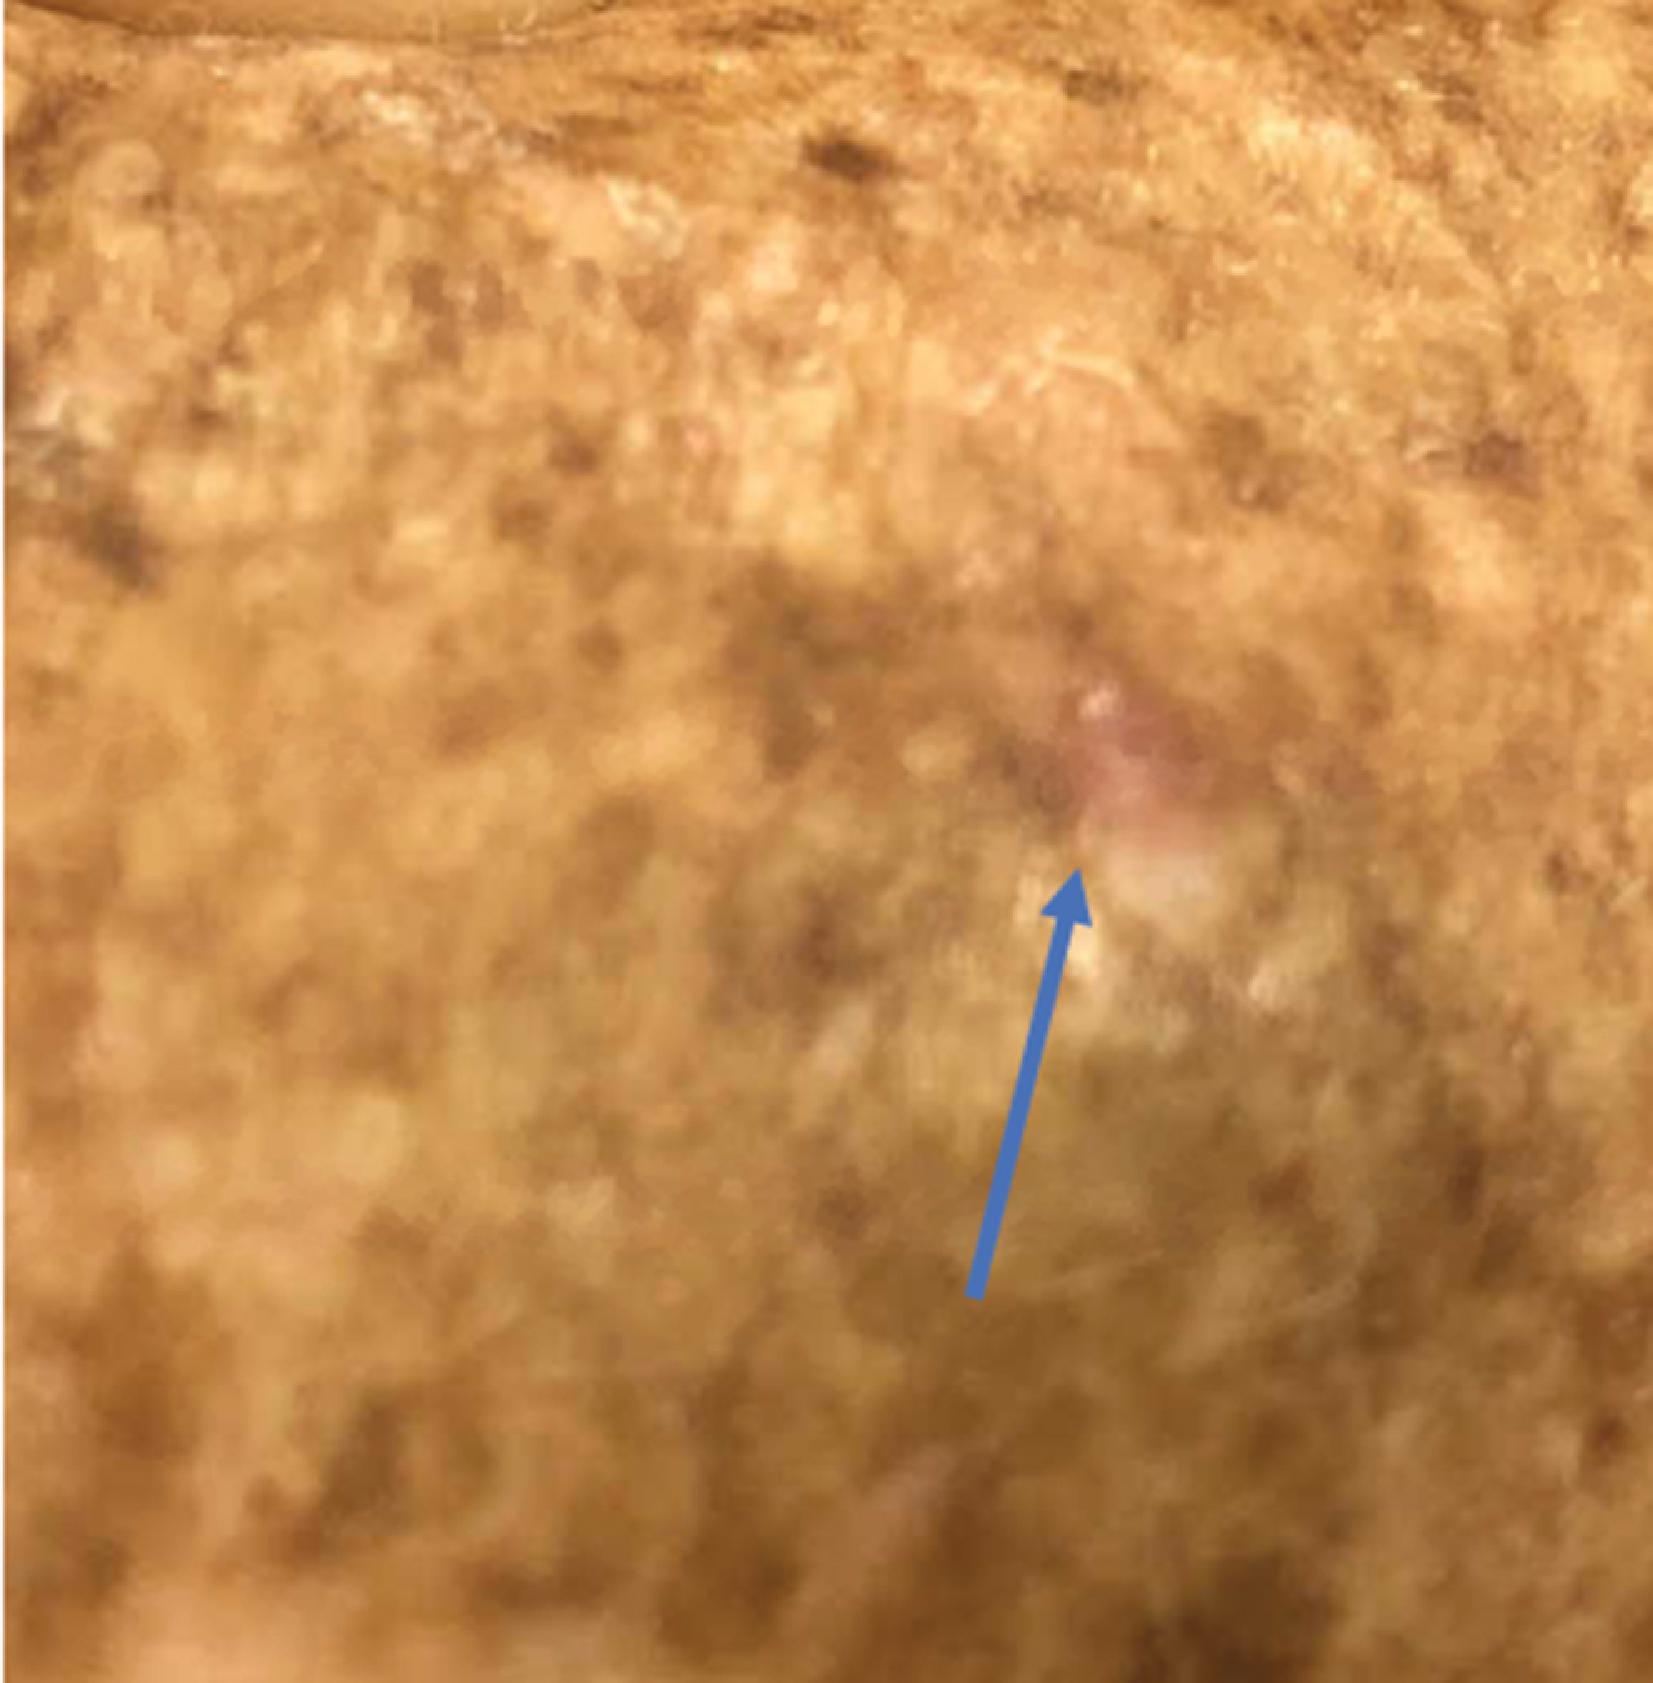 FIG. 8, Amelanotic melanoma. The appearance of these lesions may easily be confused with a benign lesion. The arrow indicates the subtle lesion.